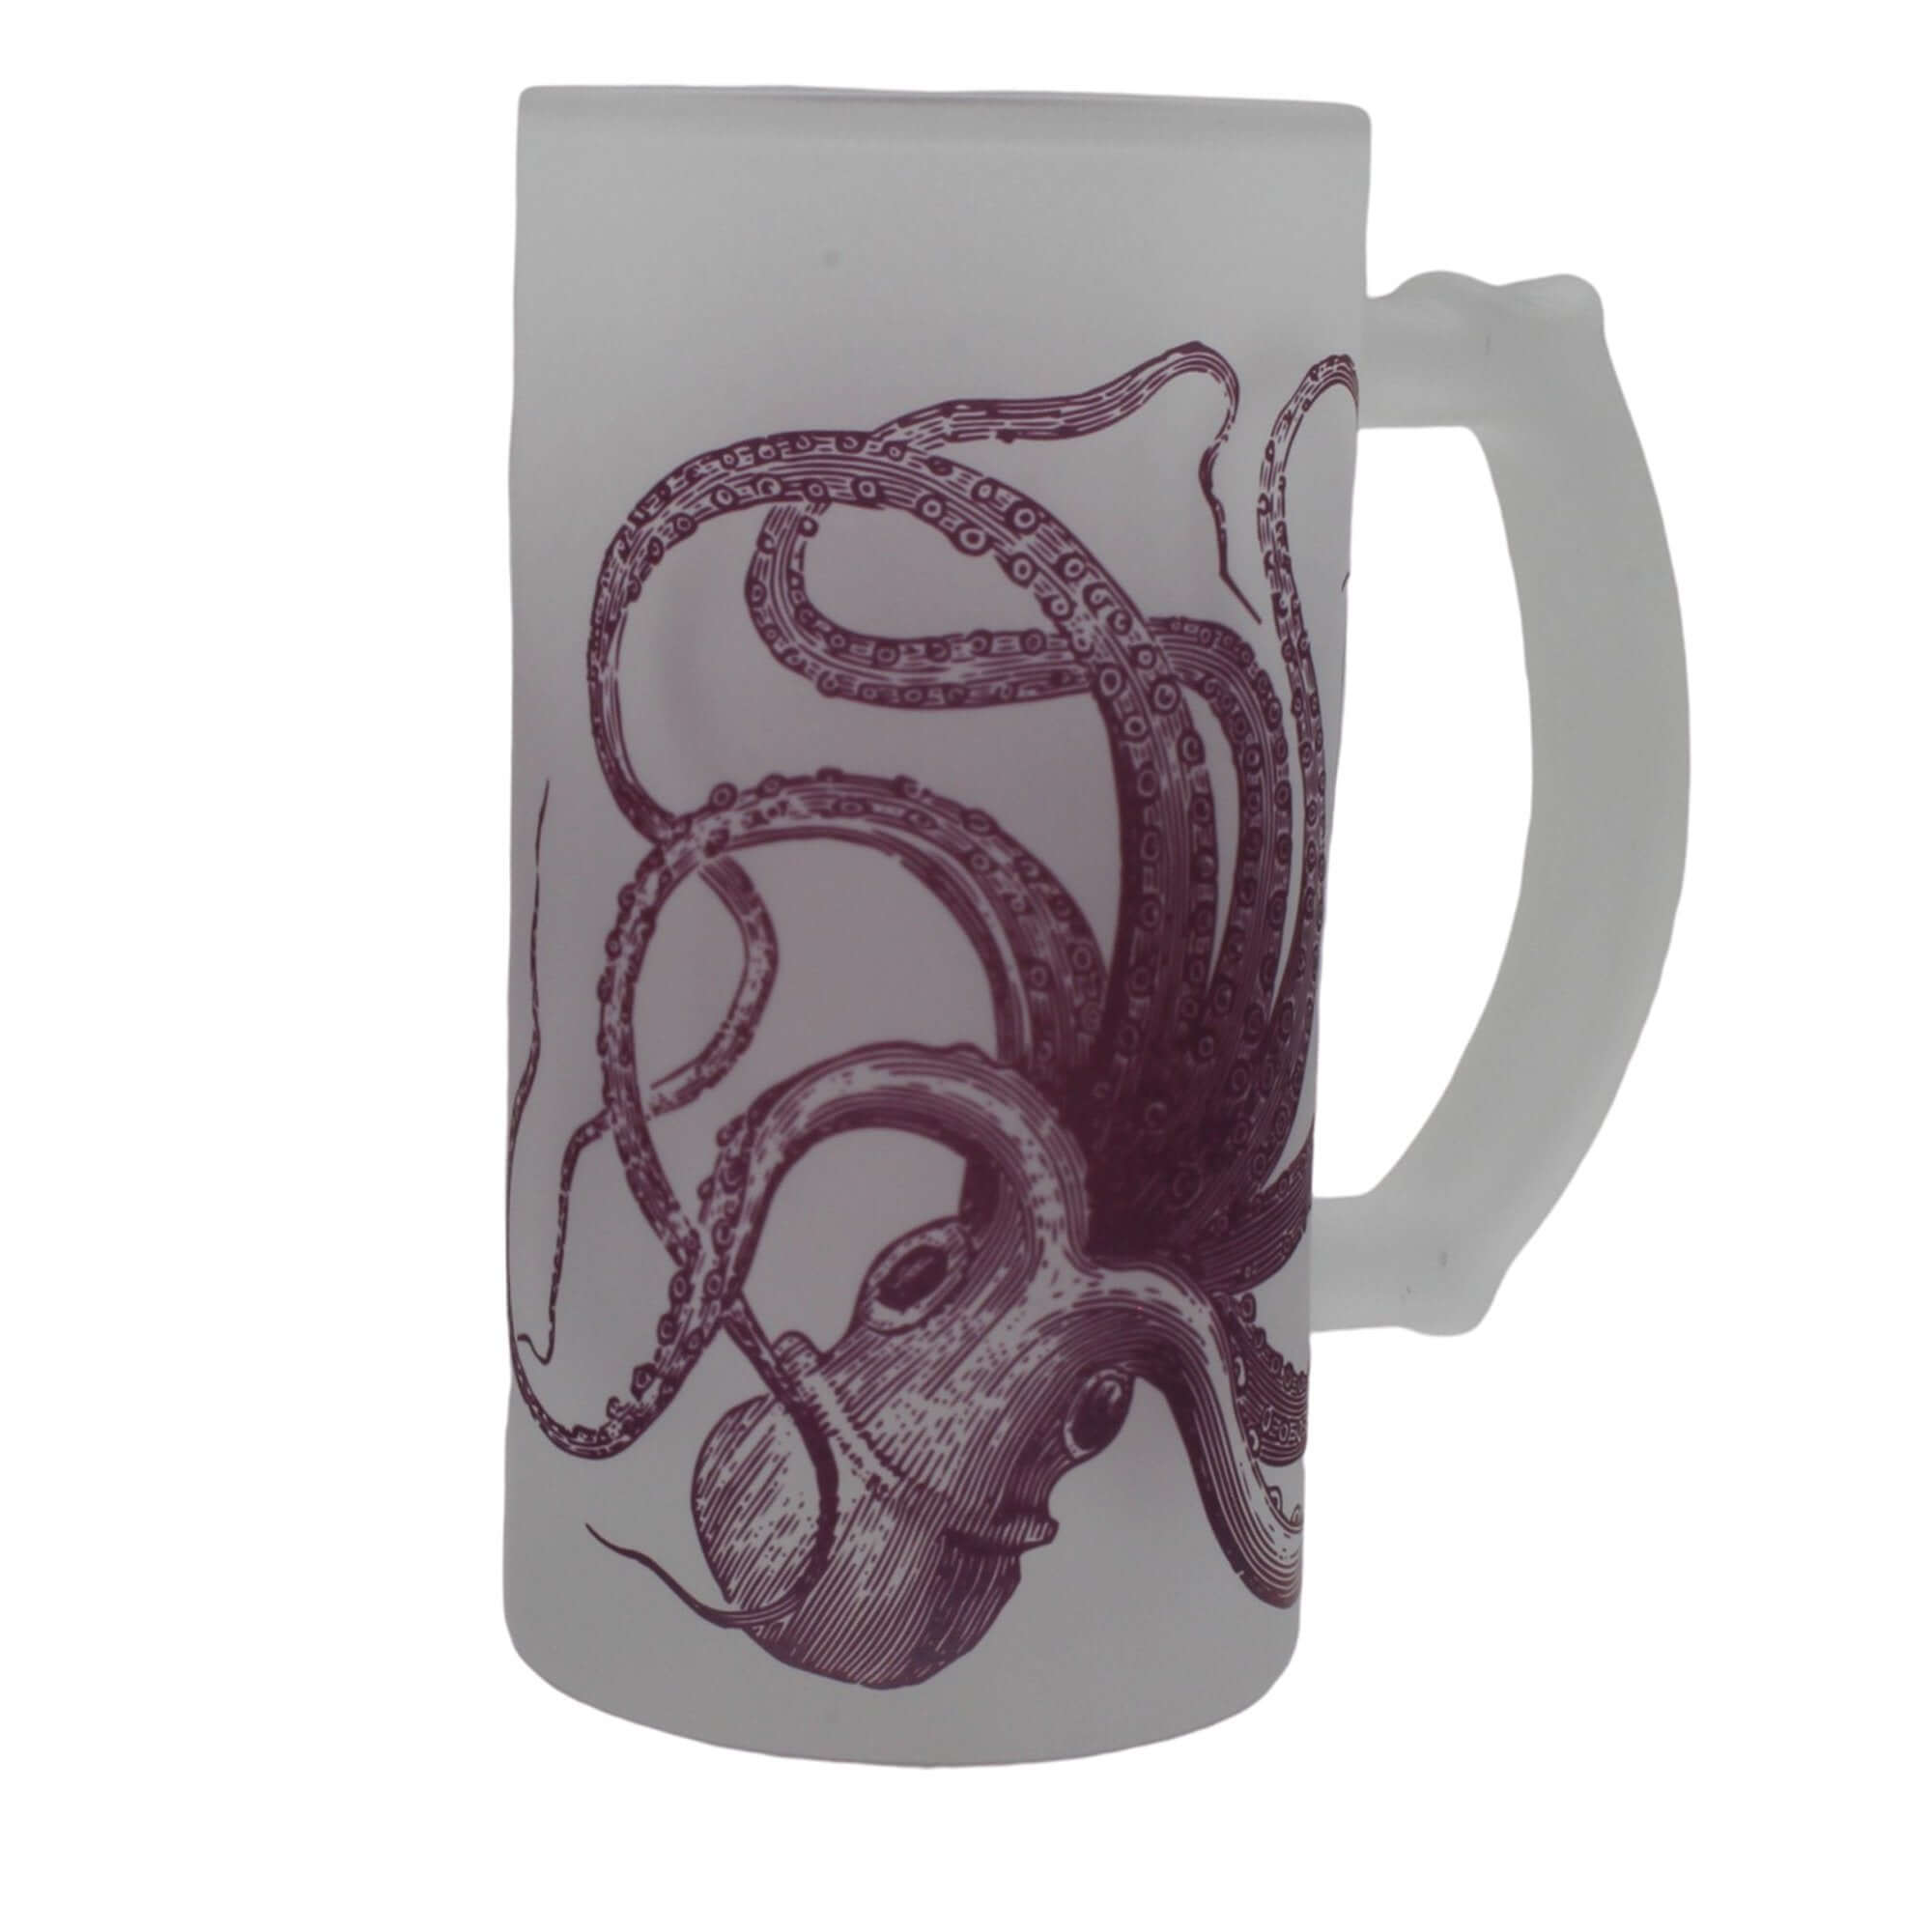 Kraken Can Can Frosted Beer Stein Beer Stein Mustard and Gray Ltd Shropshire UK